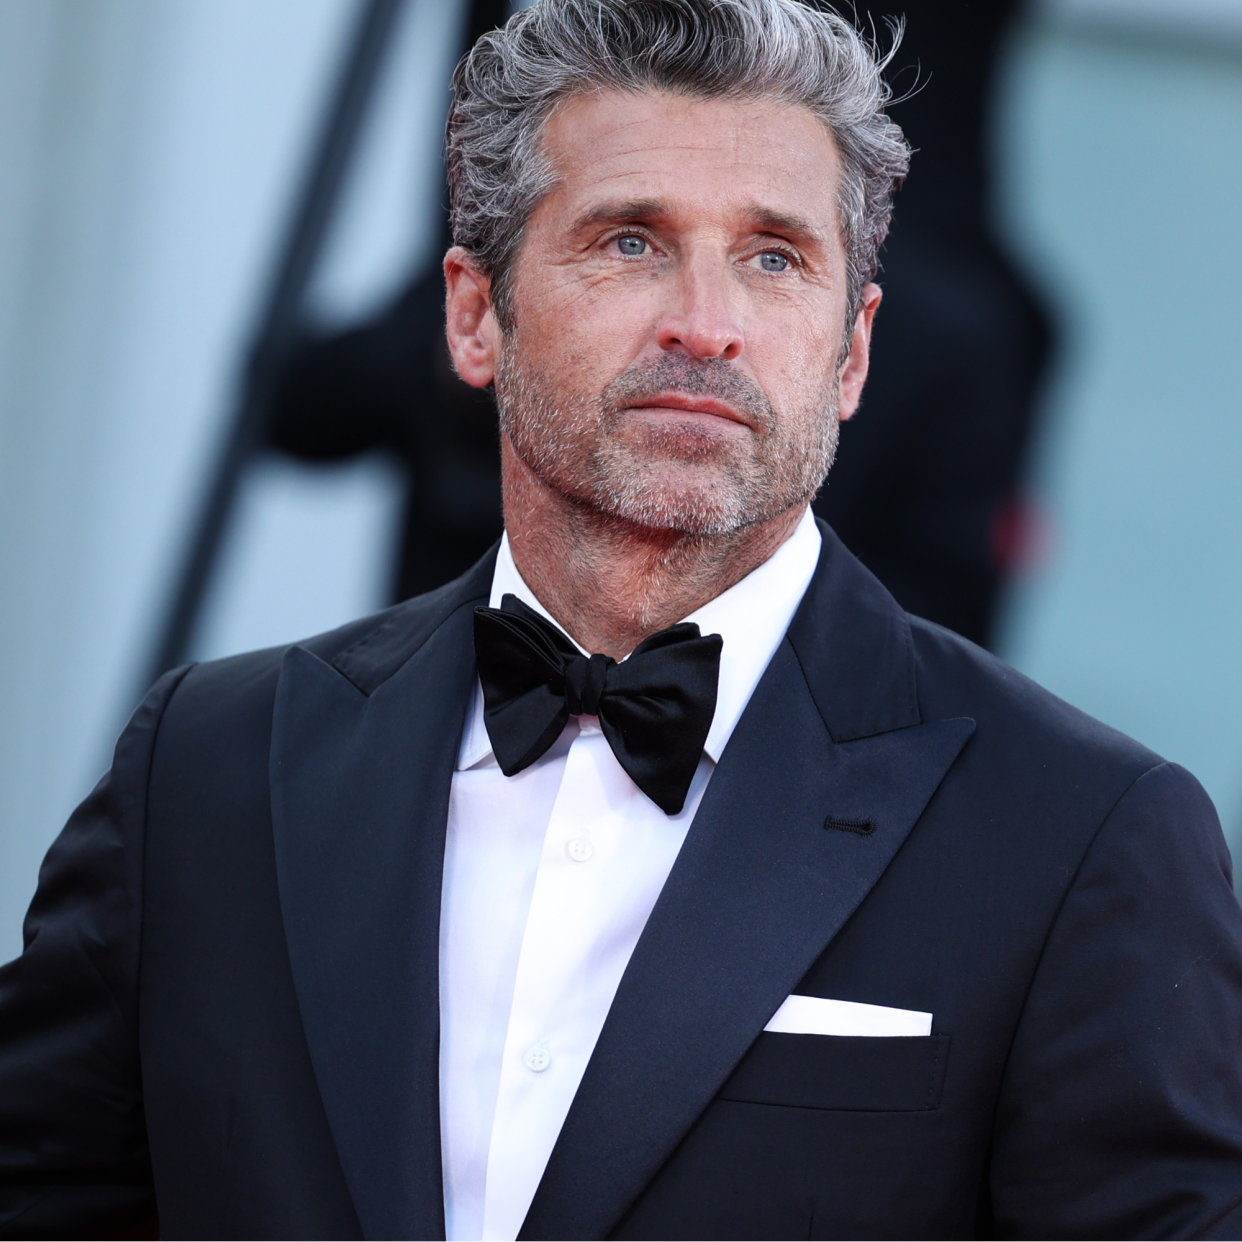  Patrick Dempsey attends a red carpet for the movie "Ferrari" at the 80th Venice International Film Festival on August 31, 2023 in Venice, Italy. 